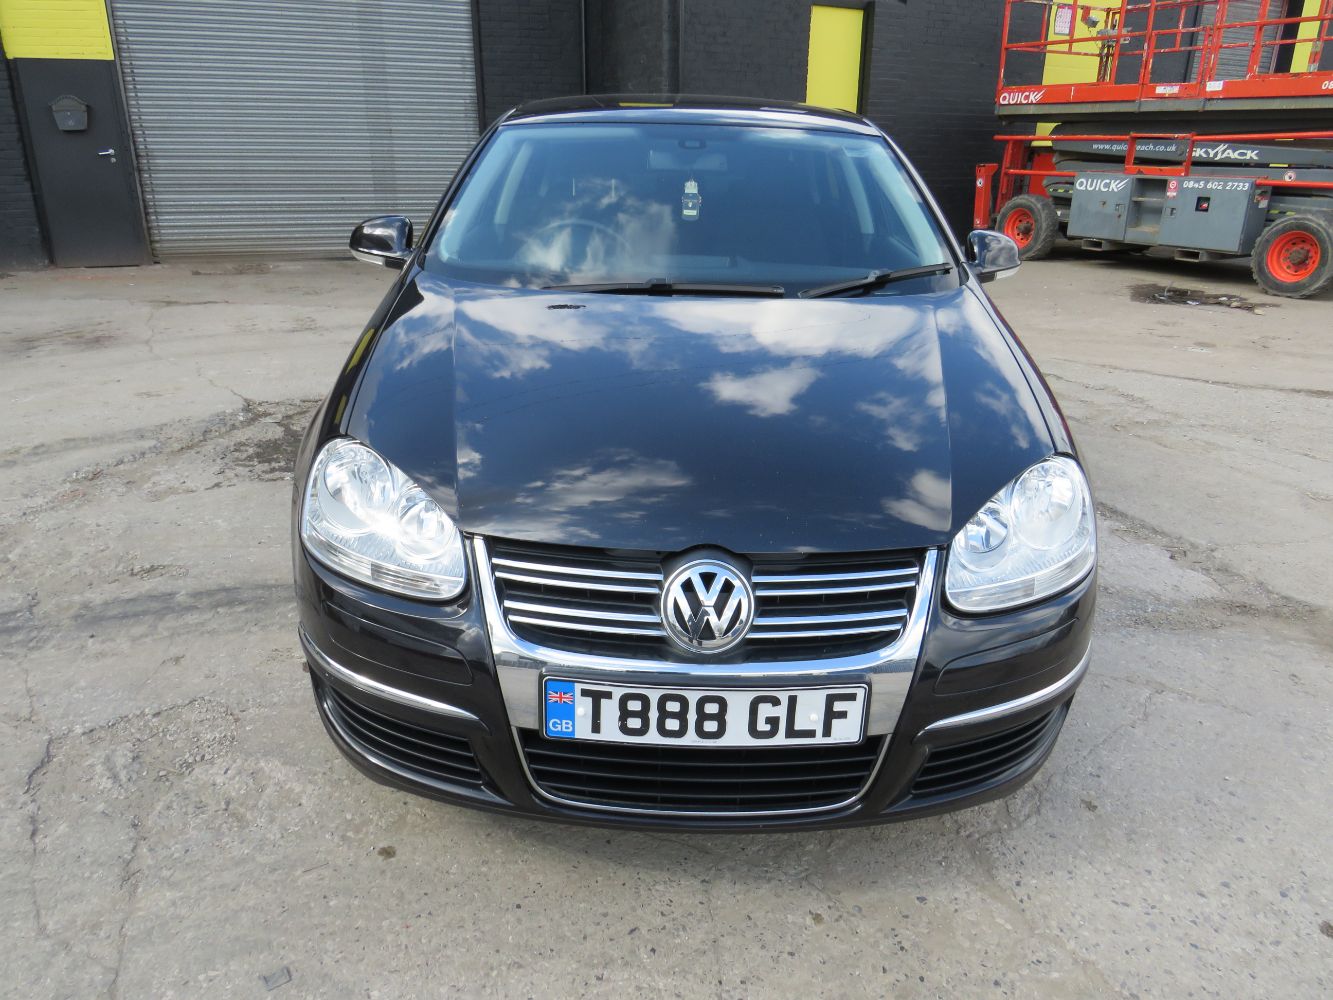 2010 Volkswagen Jetta with Private Reg included